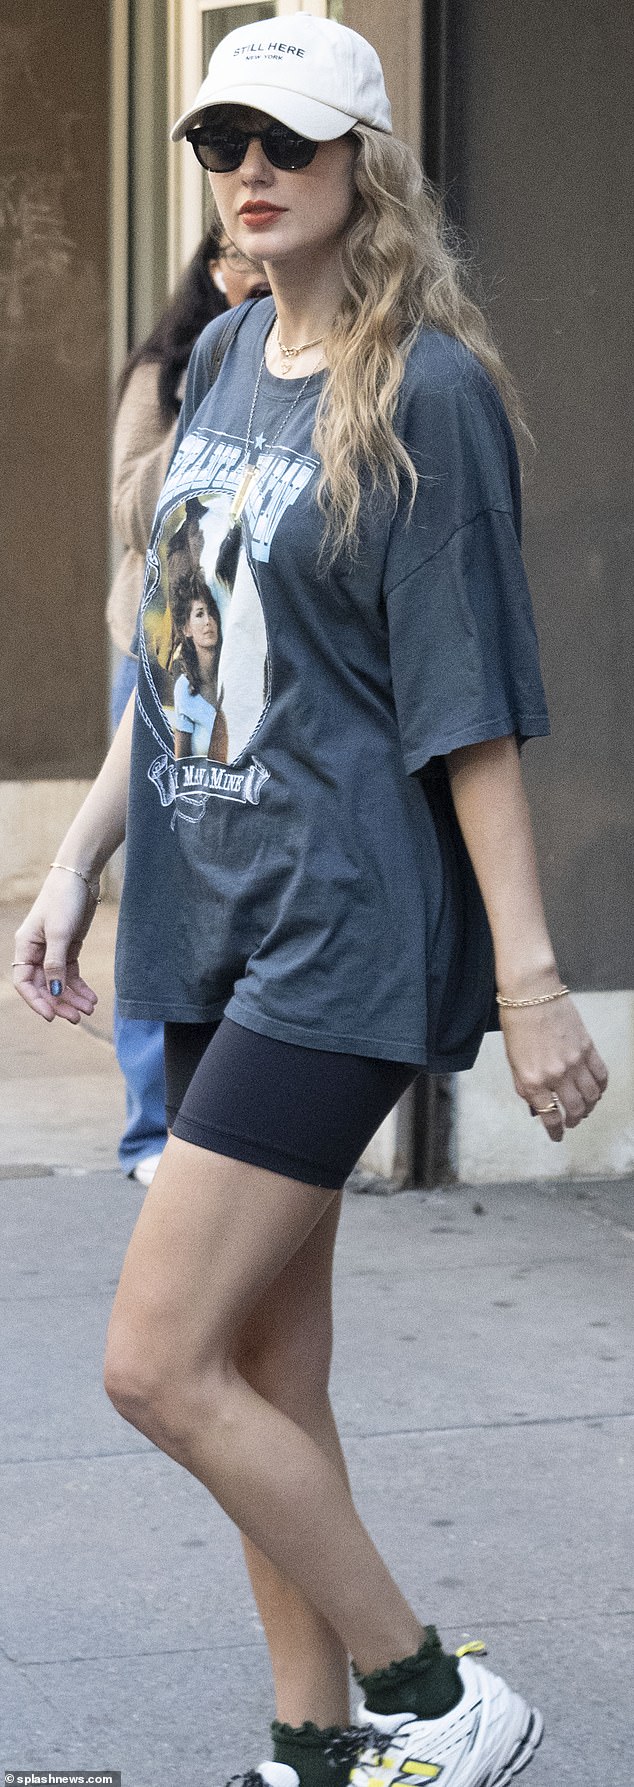 Taylor Swift is photographed wearing a Shania Twain T-shirt after a recording session at Electric Lady Studios in New York